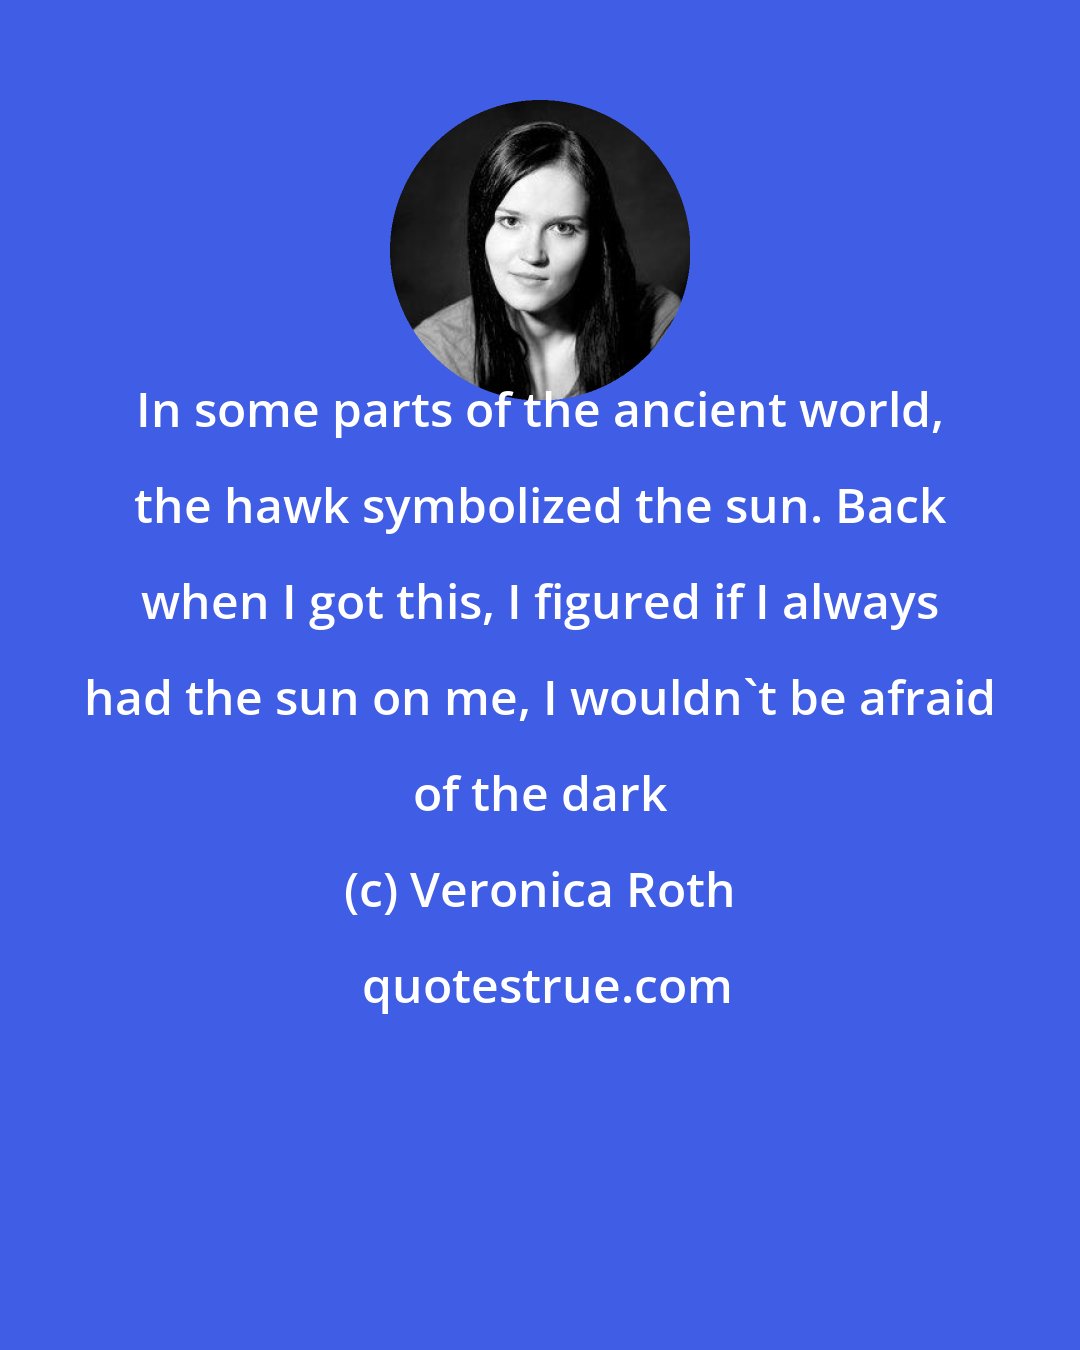 Veronica Roth: In some parts of the ancient world, the hawk symbolized the sun. Back when I got this, I figured if I always had the sun on me, I wouldn't be afraid of the dark